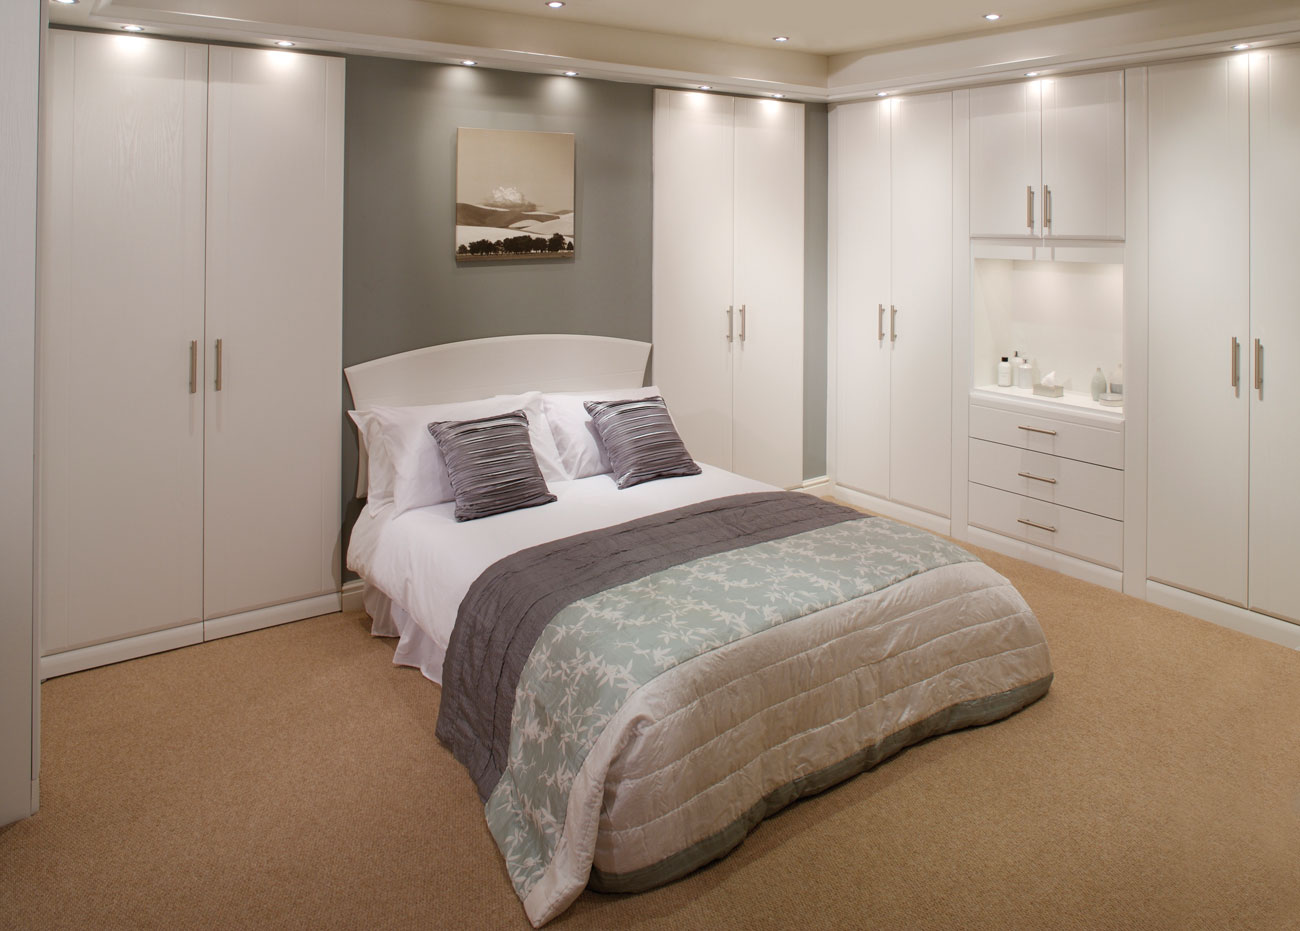 fitted bedroom furniture designs photo - 5